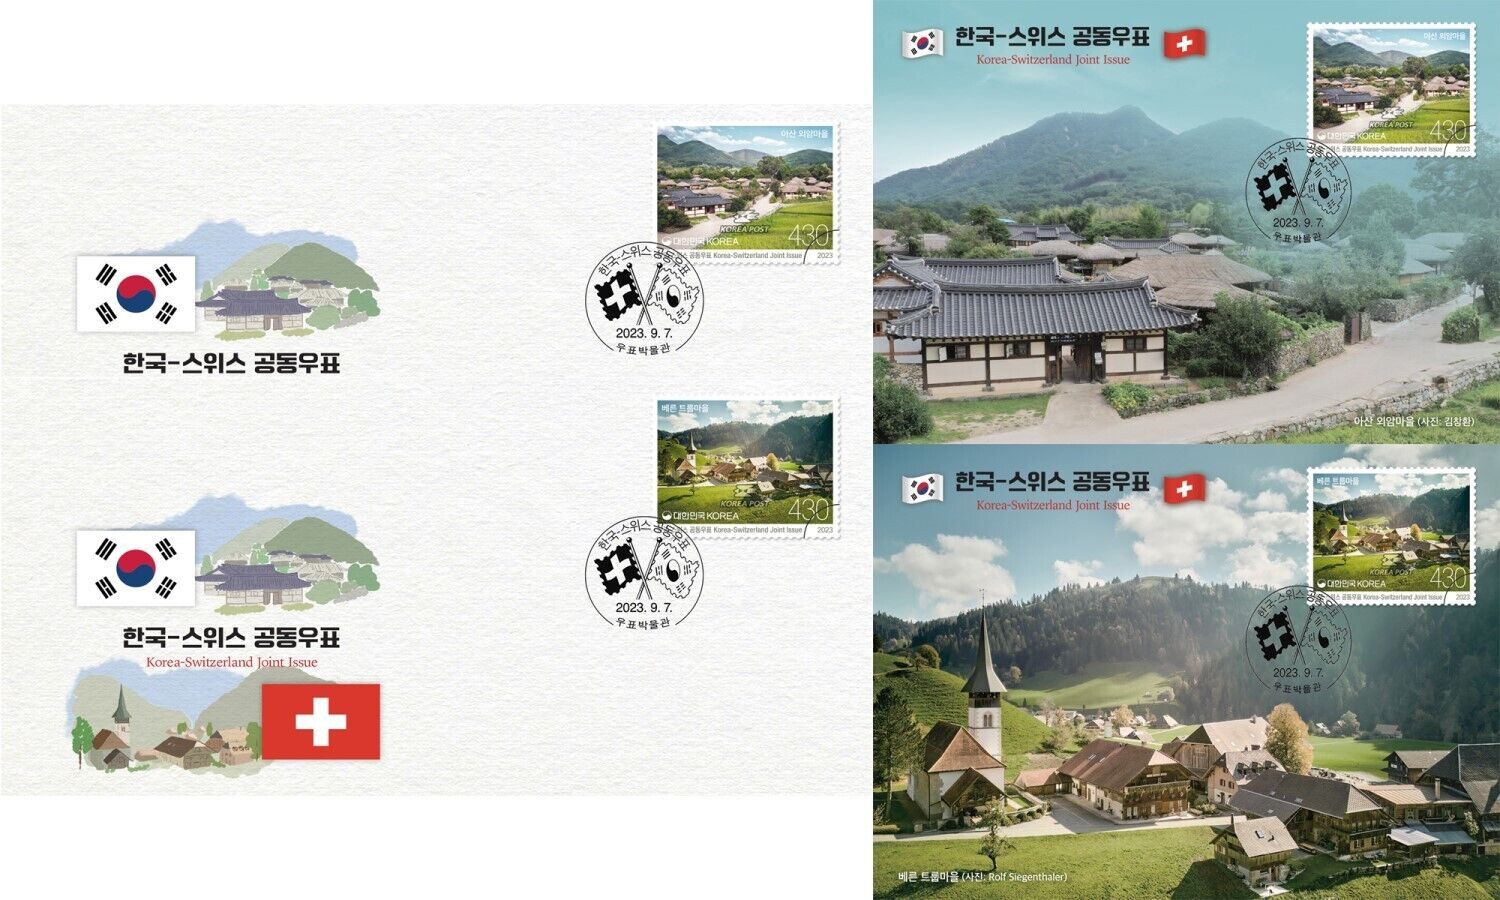 Korea Switzerland Joint Issue, Post Office Official FDC(2) + MaxCard(2) 2023